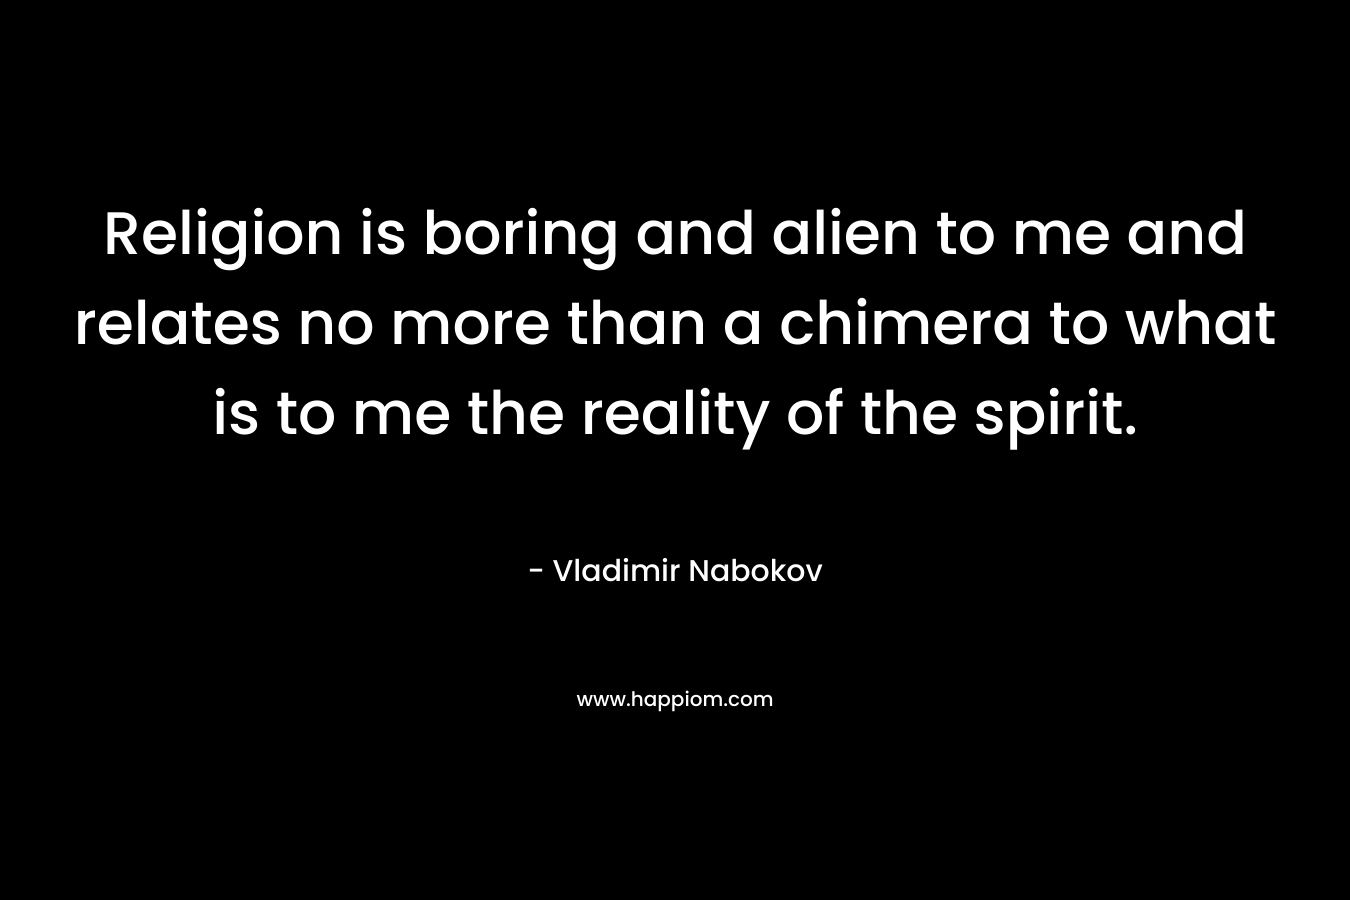 Religion is boring and alien to me and relates no more than a chimera to what is to me the reality of the spirit.